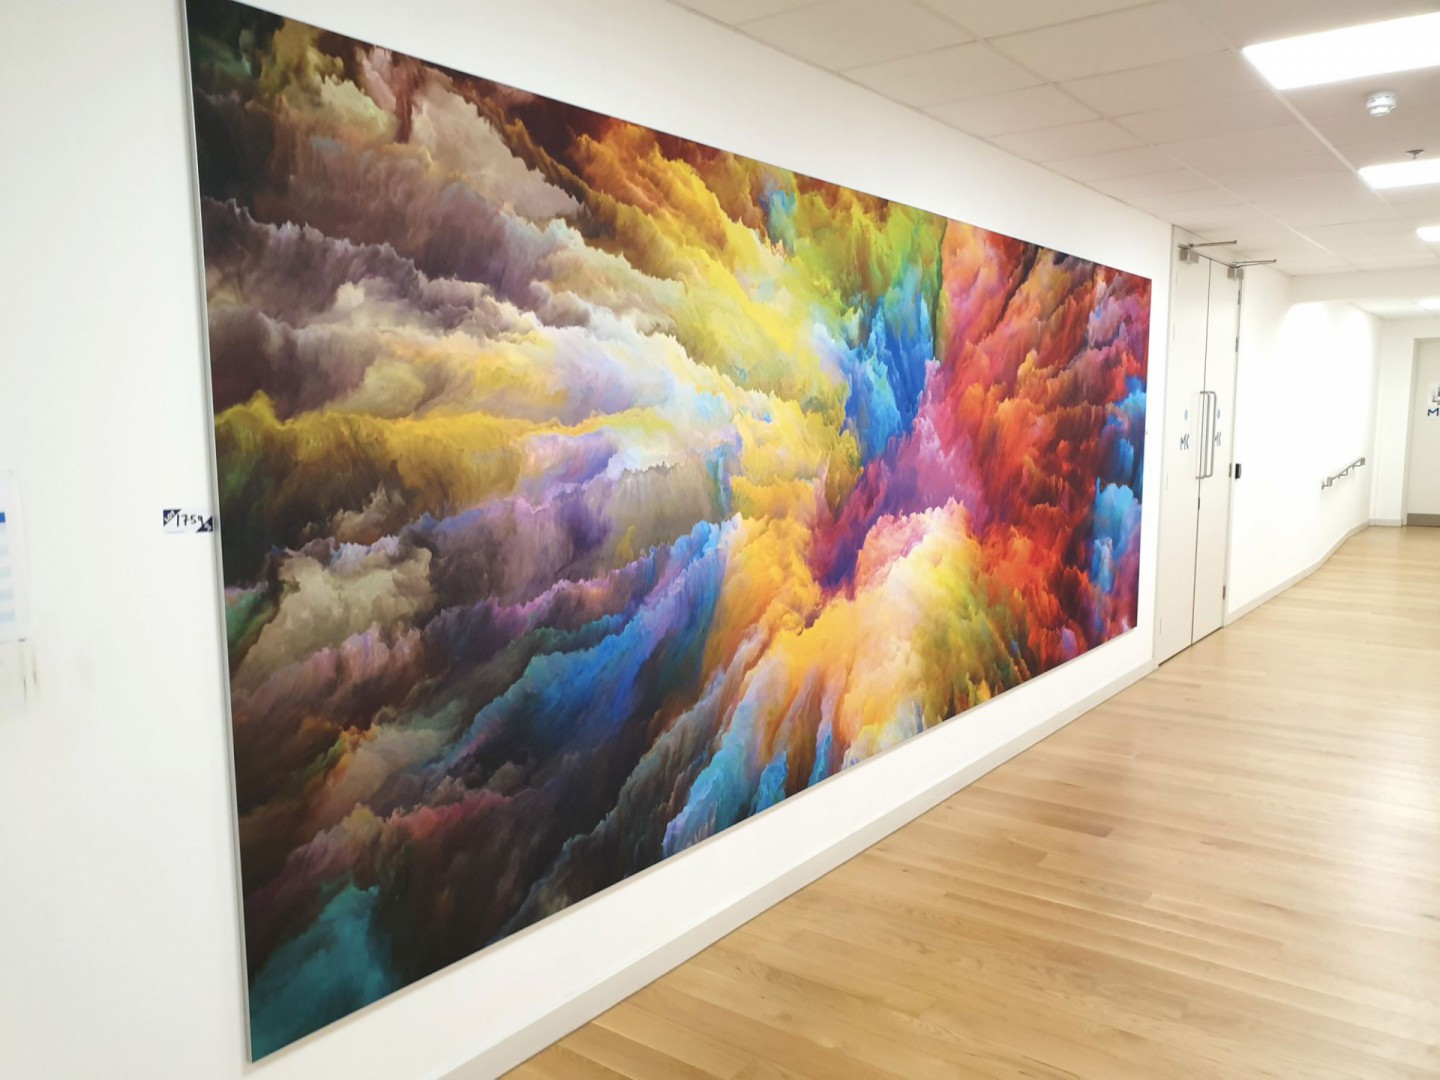 Large colour mural canvas, 6000x2140mm in frame